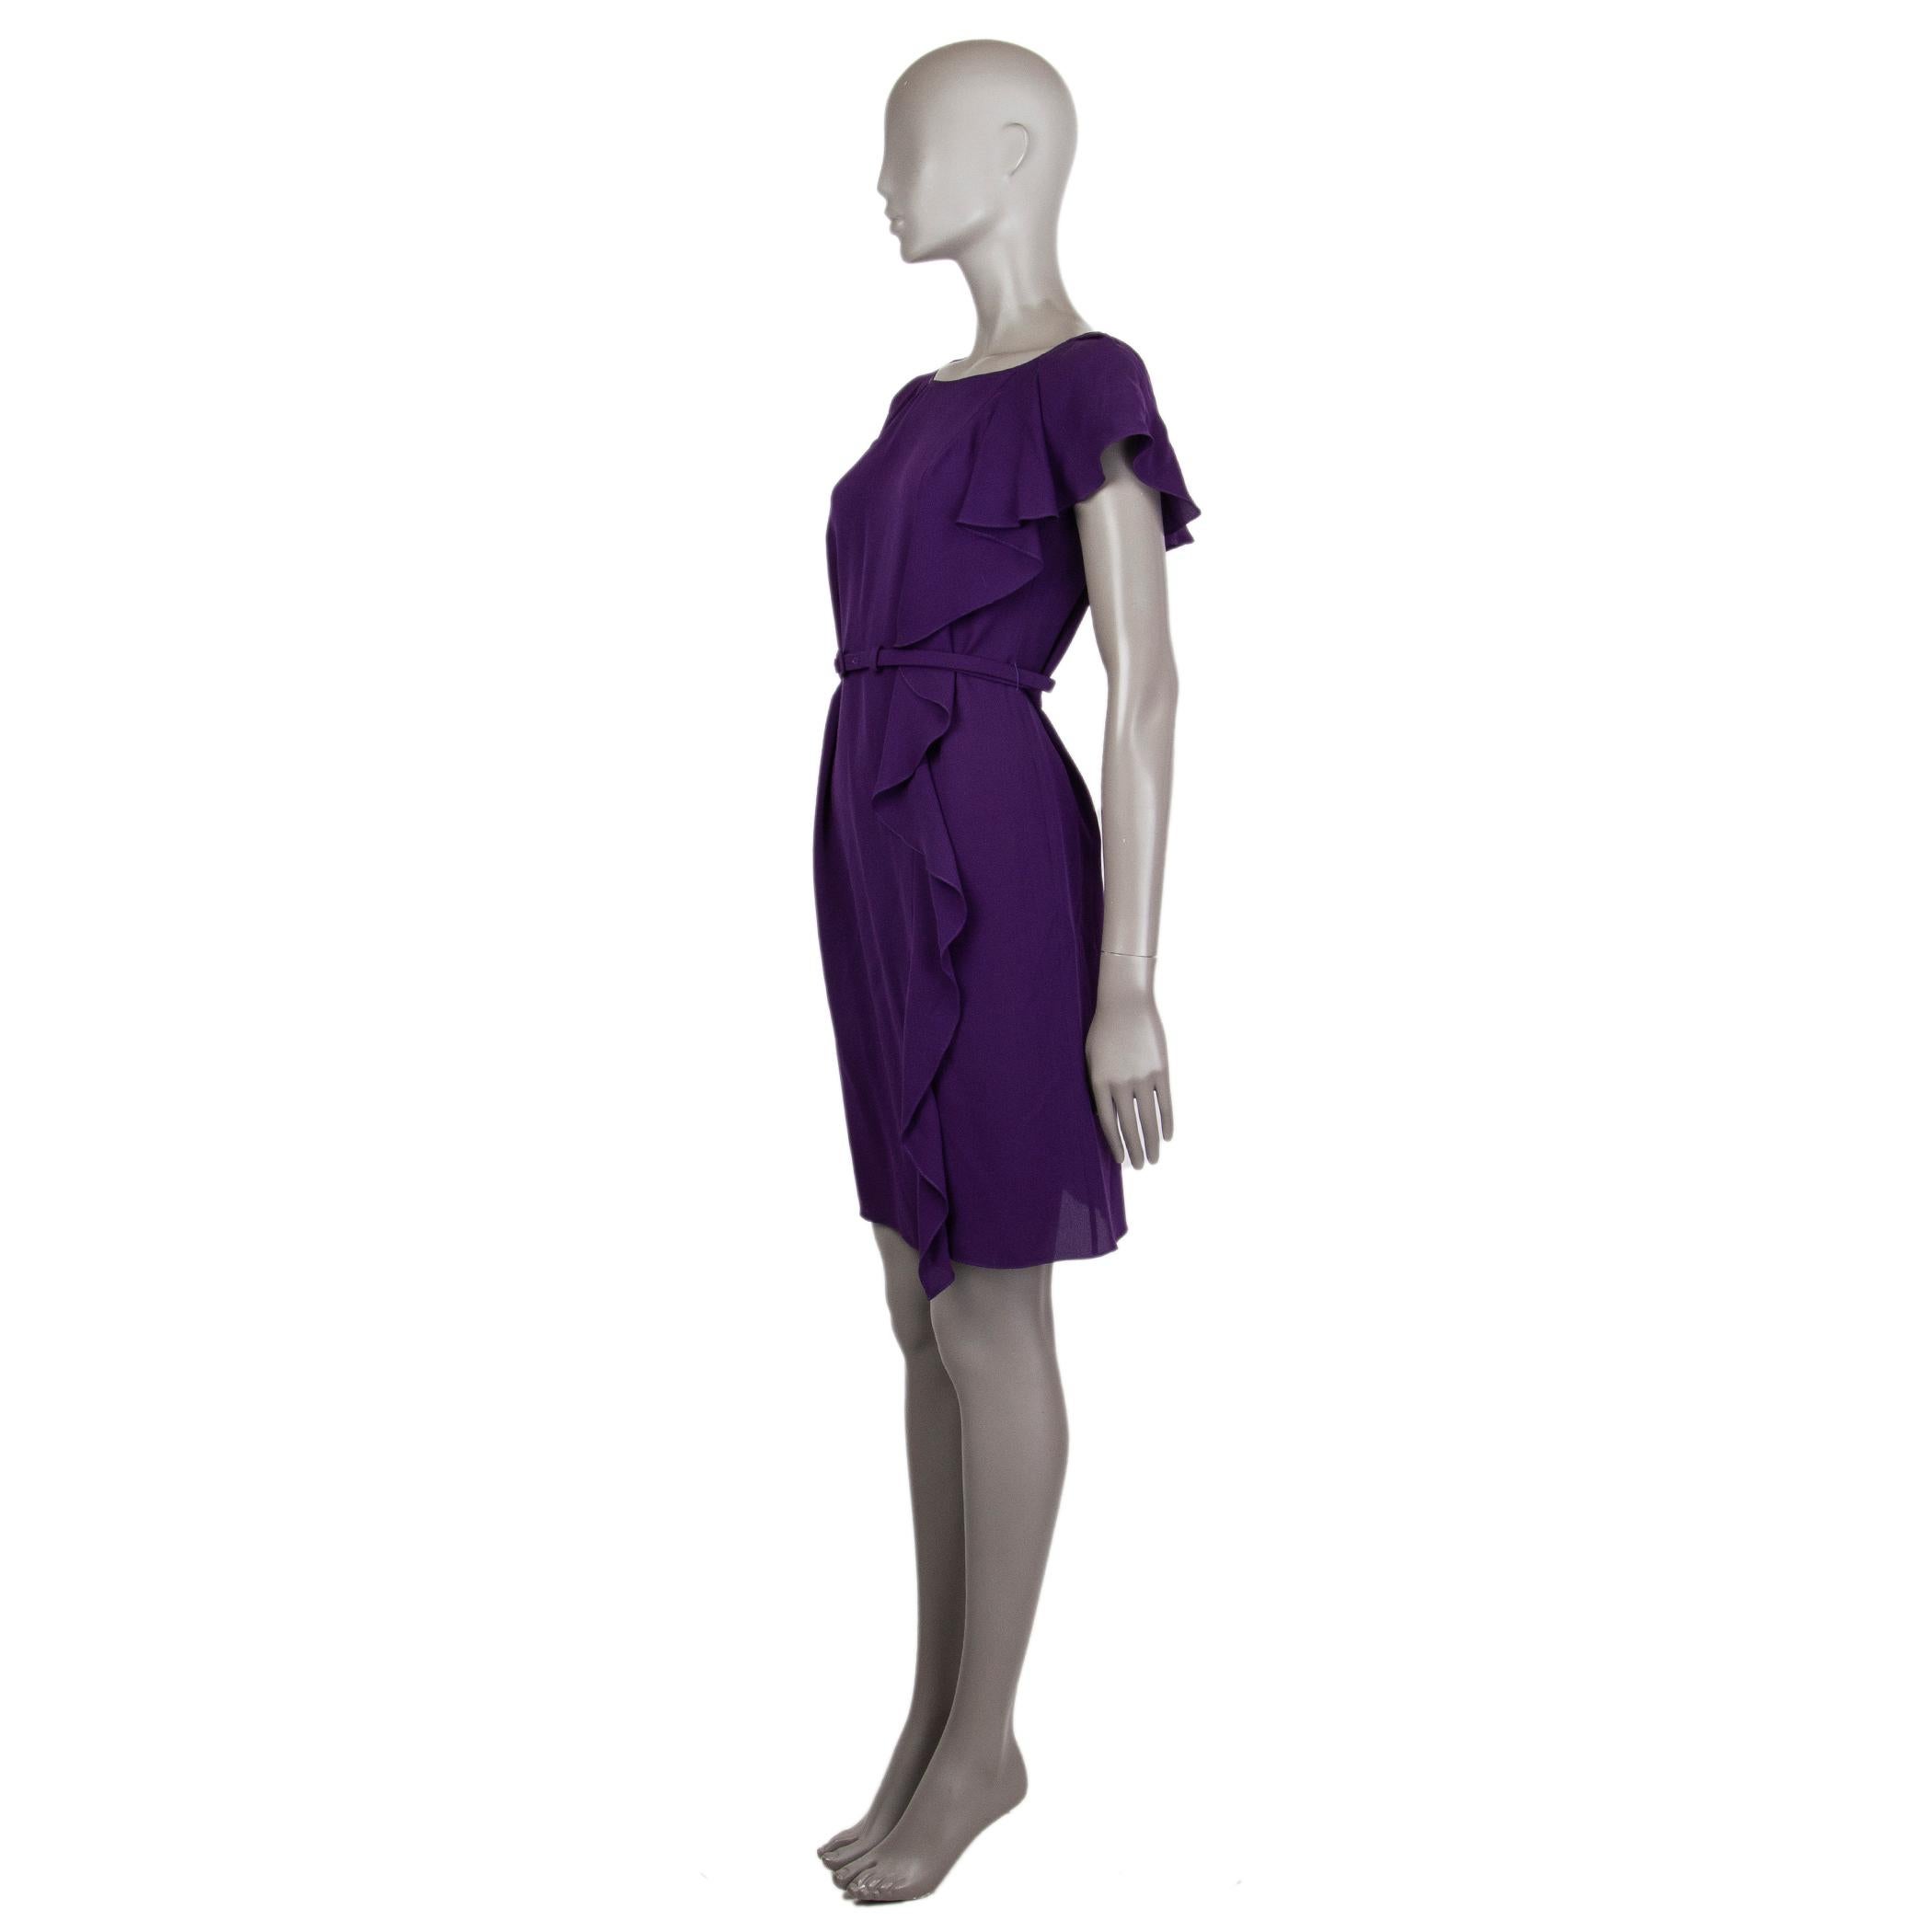 Prada sleeveless dress in grape purple silk (100%) with a straight cut features a belt to create a silhouette. Detailed with a side-ruffle from the left shoulder down to the front. Has been worn and is in excellent condition.

Tag Size 38
Size